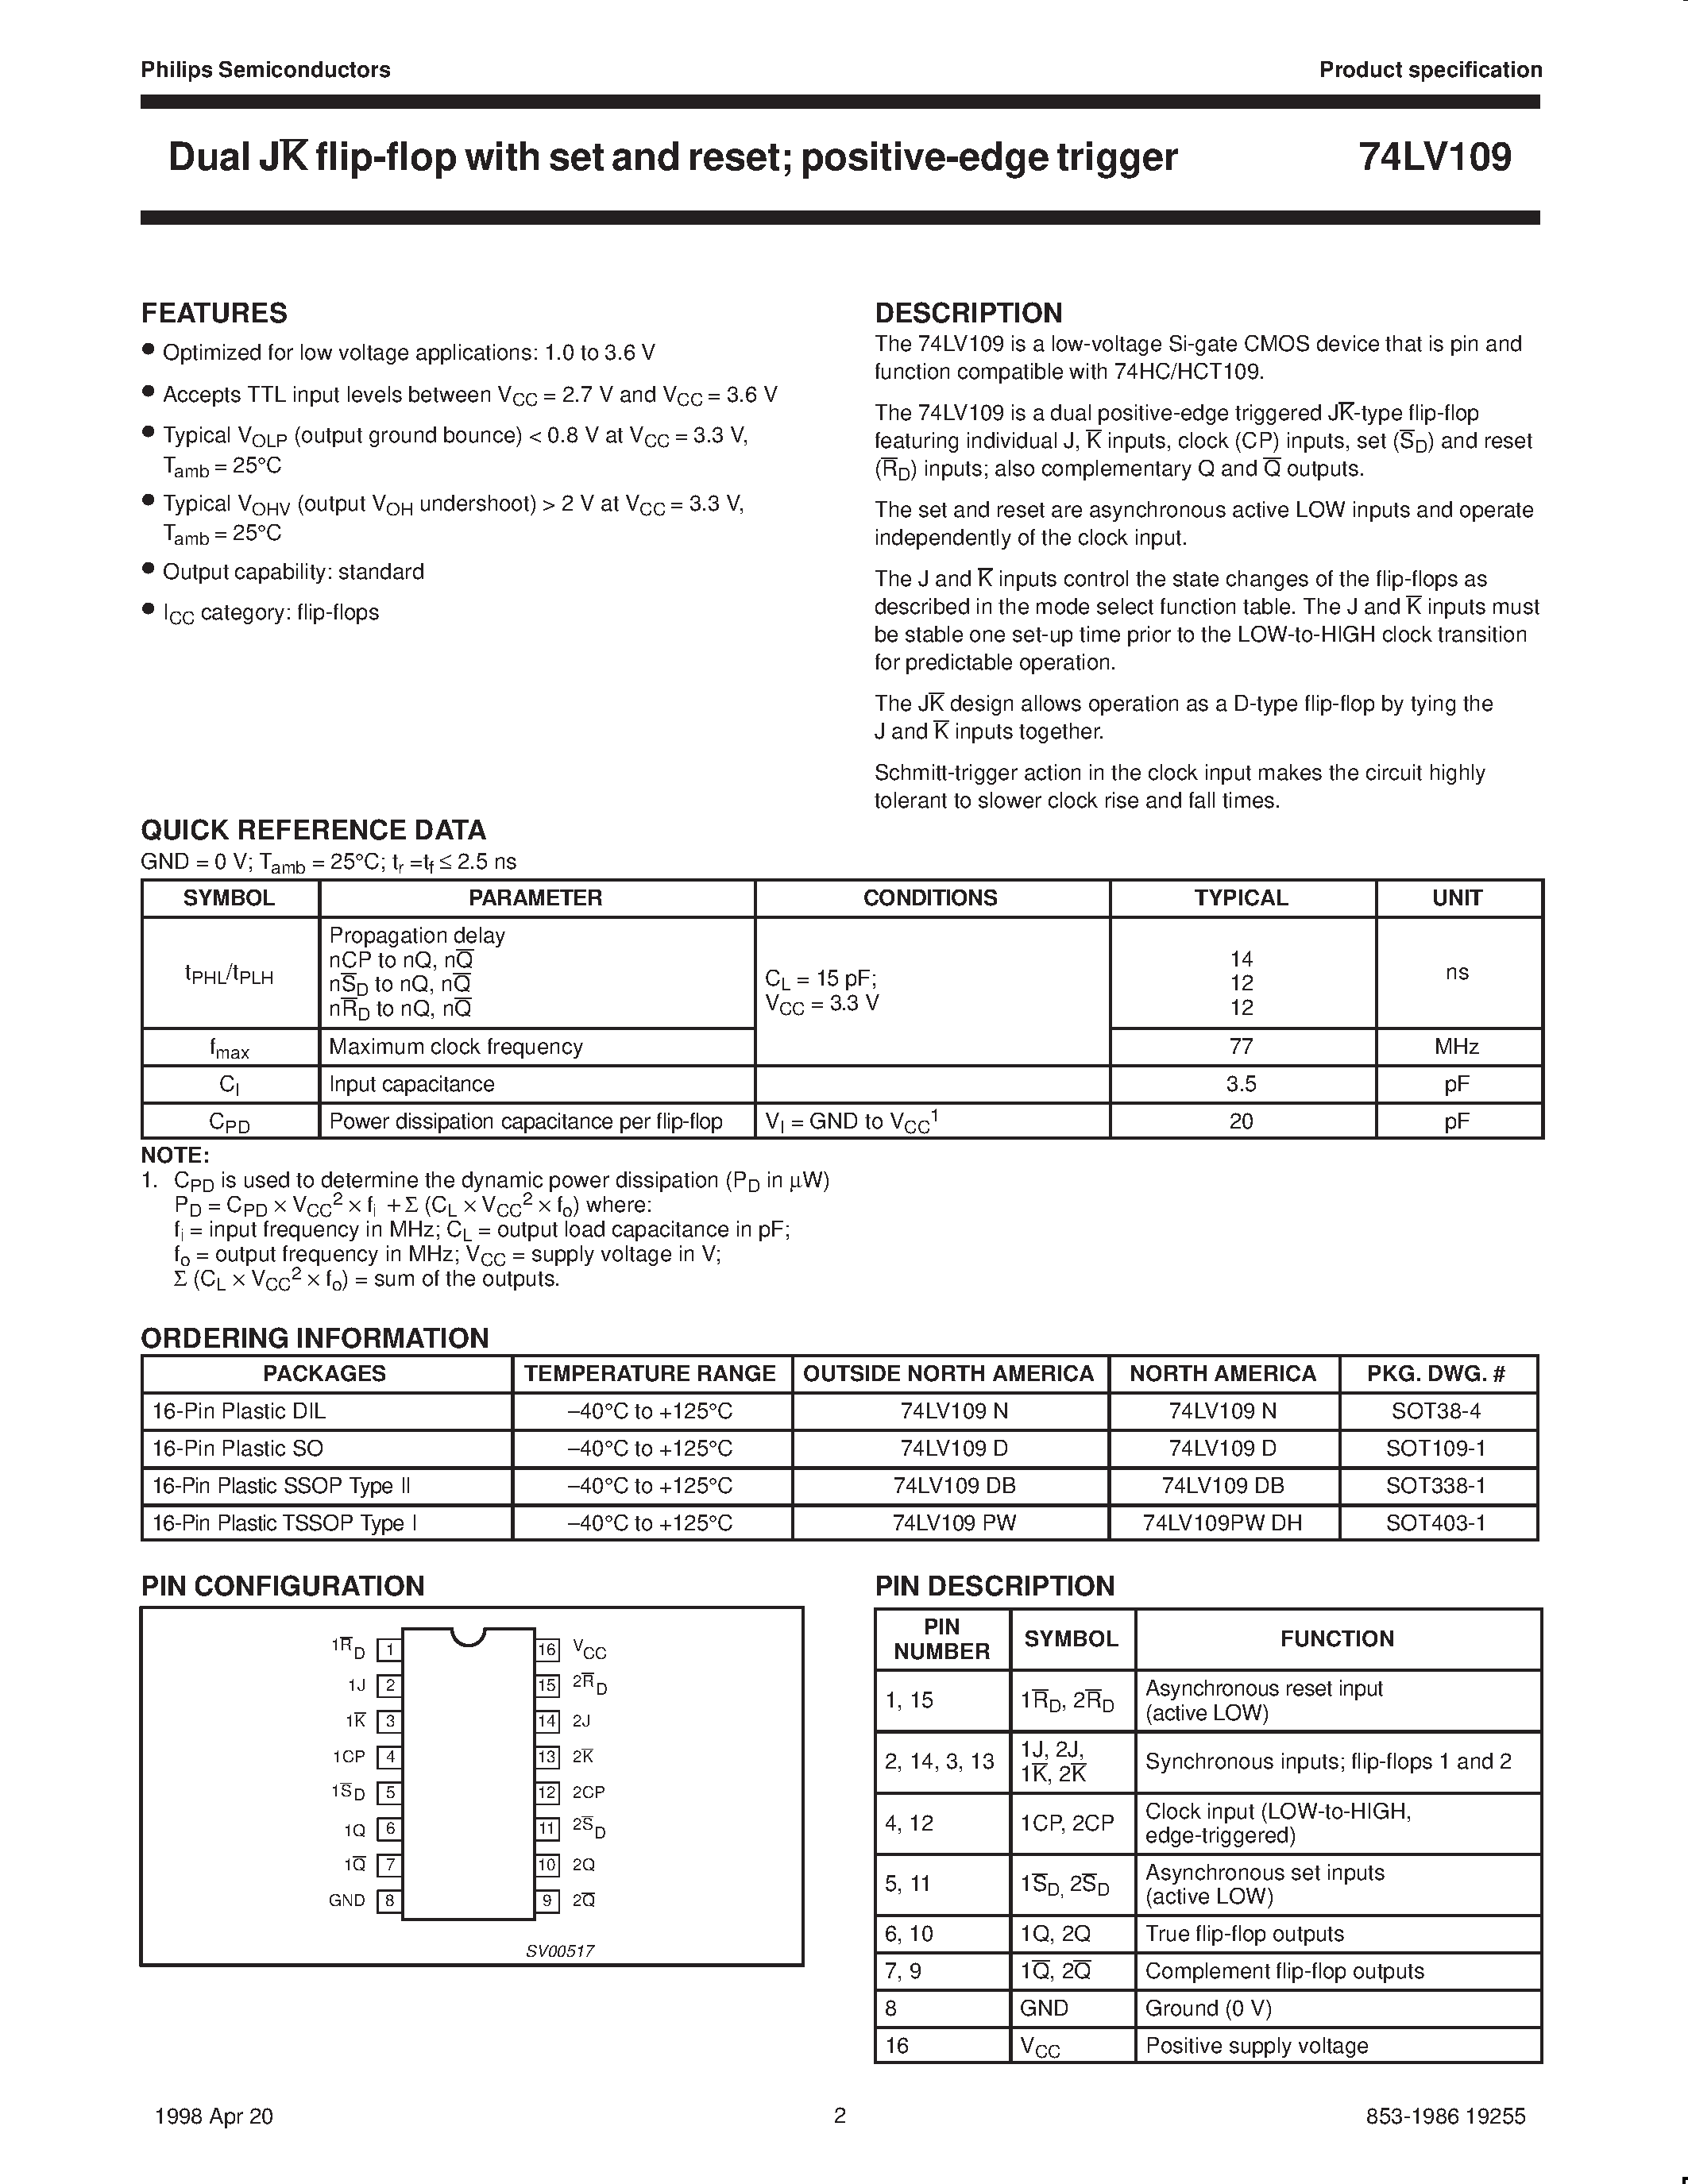 Datasheet 74LV109 - Dual JK flip-flop with set and reset; positive-edge trigger page 2